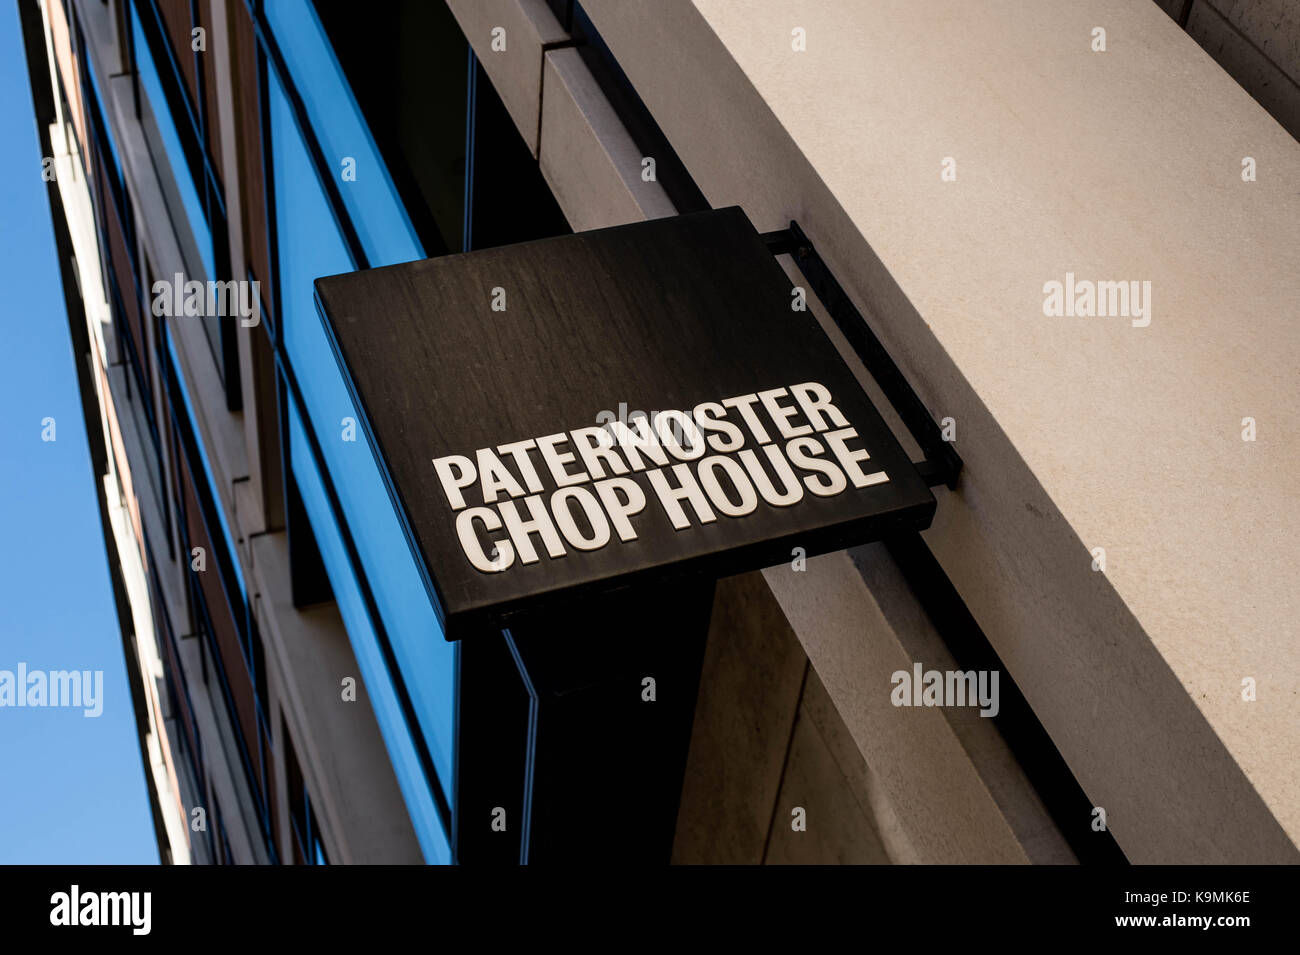 The venue for Channel 4s' First Dates Programme Paterenoster Chop House Restaurant in the City of London Stock Photo